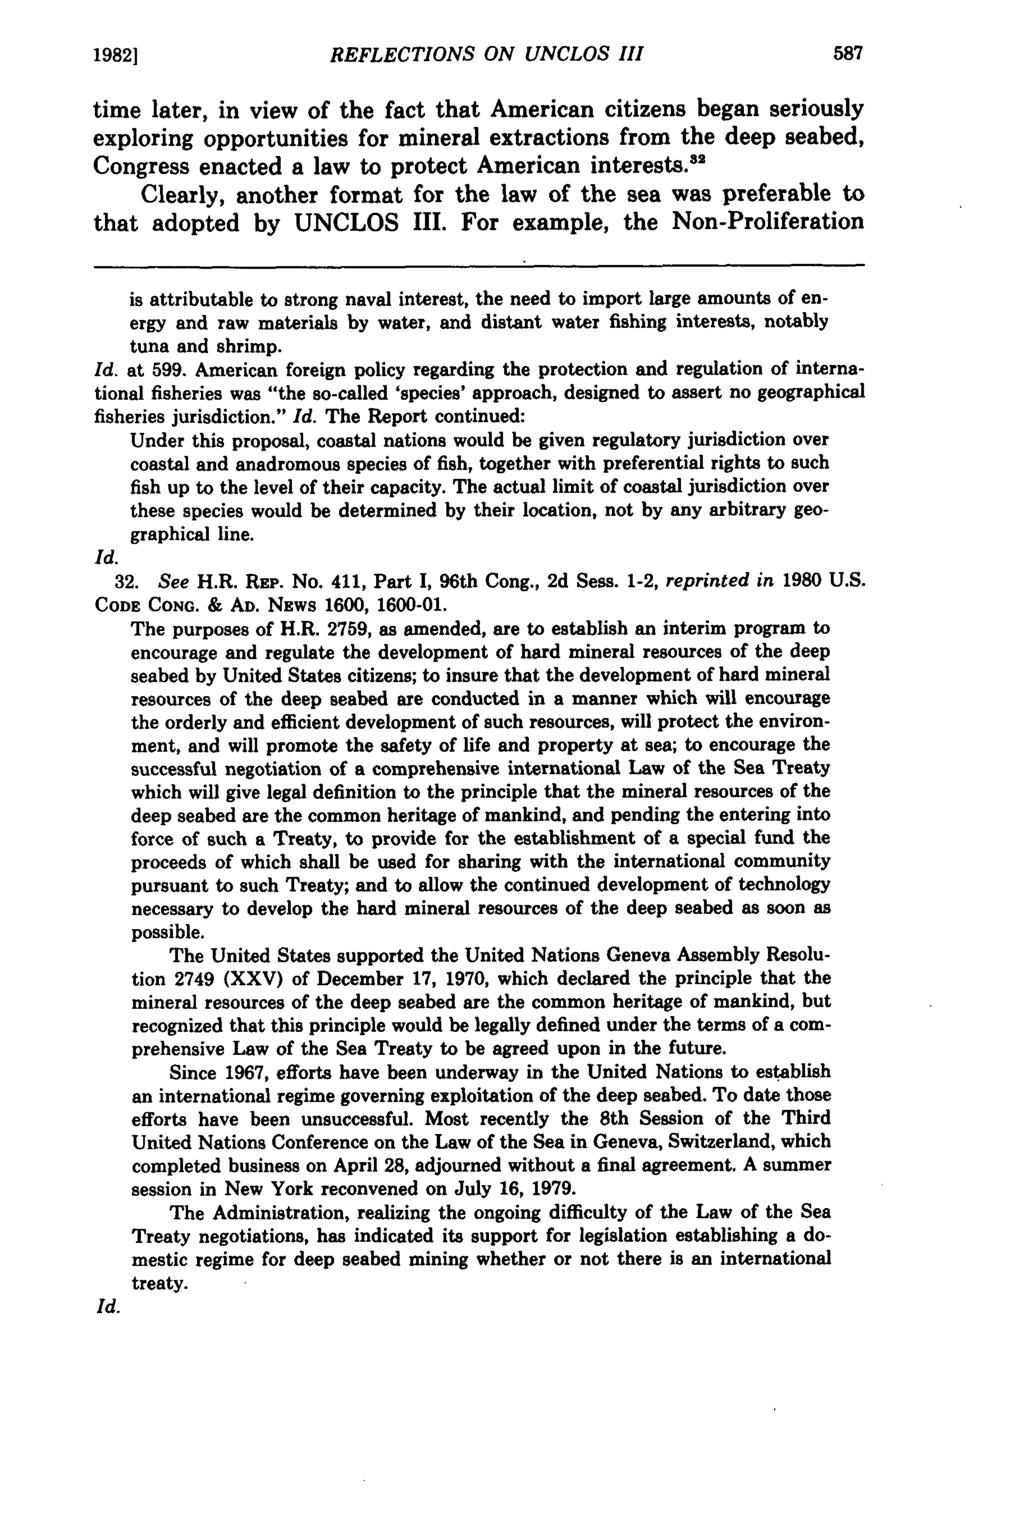 19821 REFLECTIONS ON UNCLOS III time later, in view of the fact that American citizens began seriously exploring opportunities for mineral extractions from the deep seabed, Congress enacted a law to